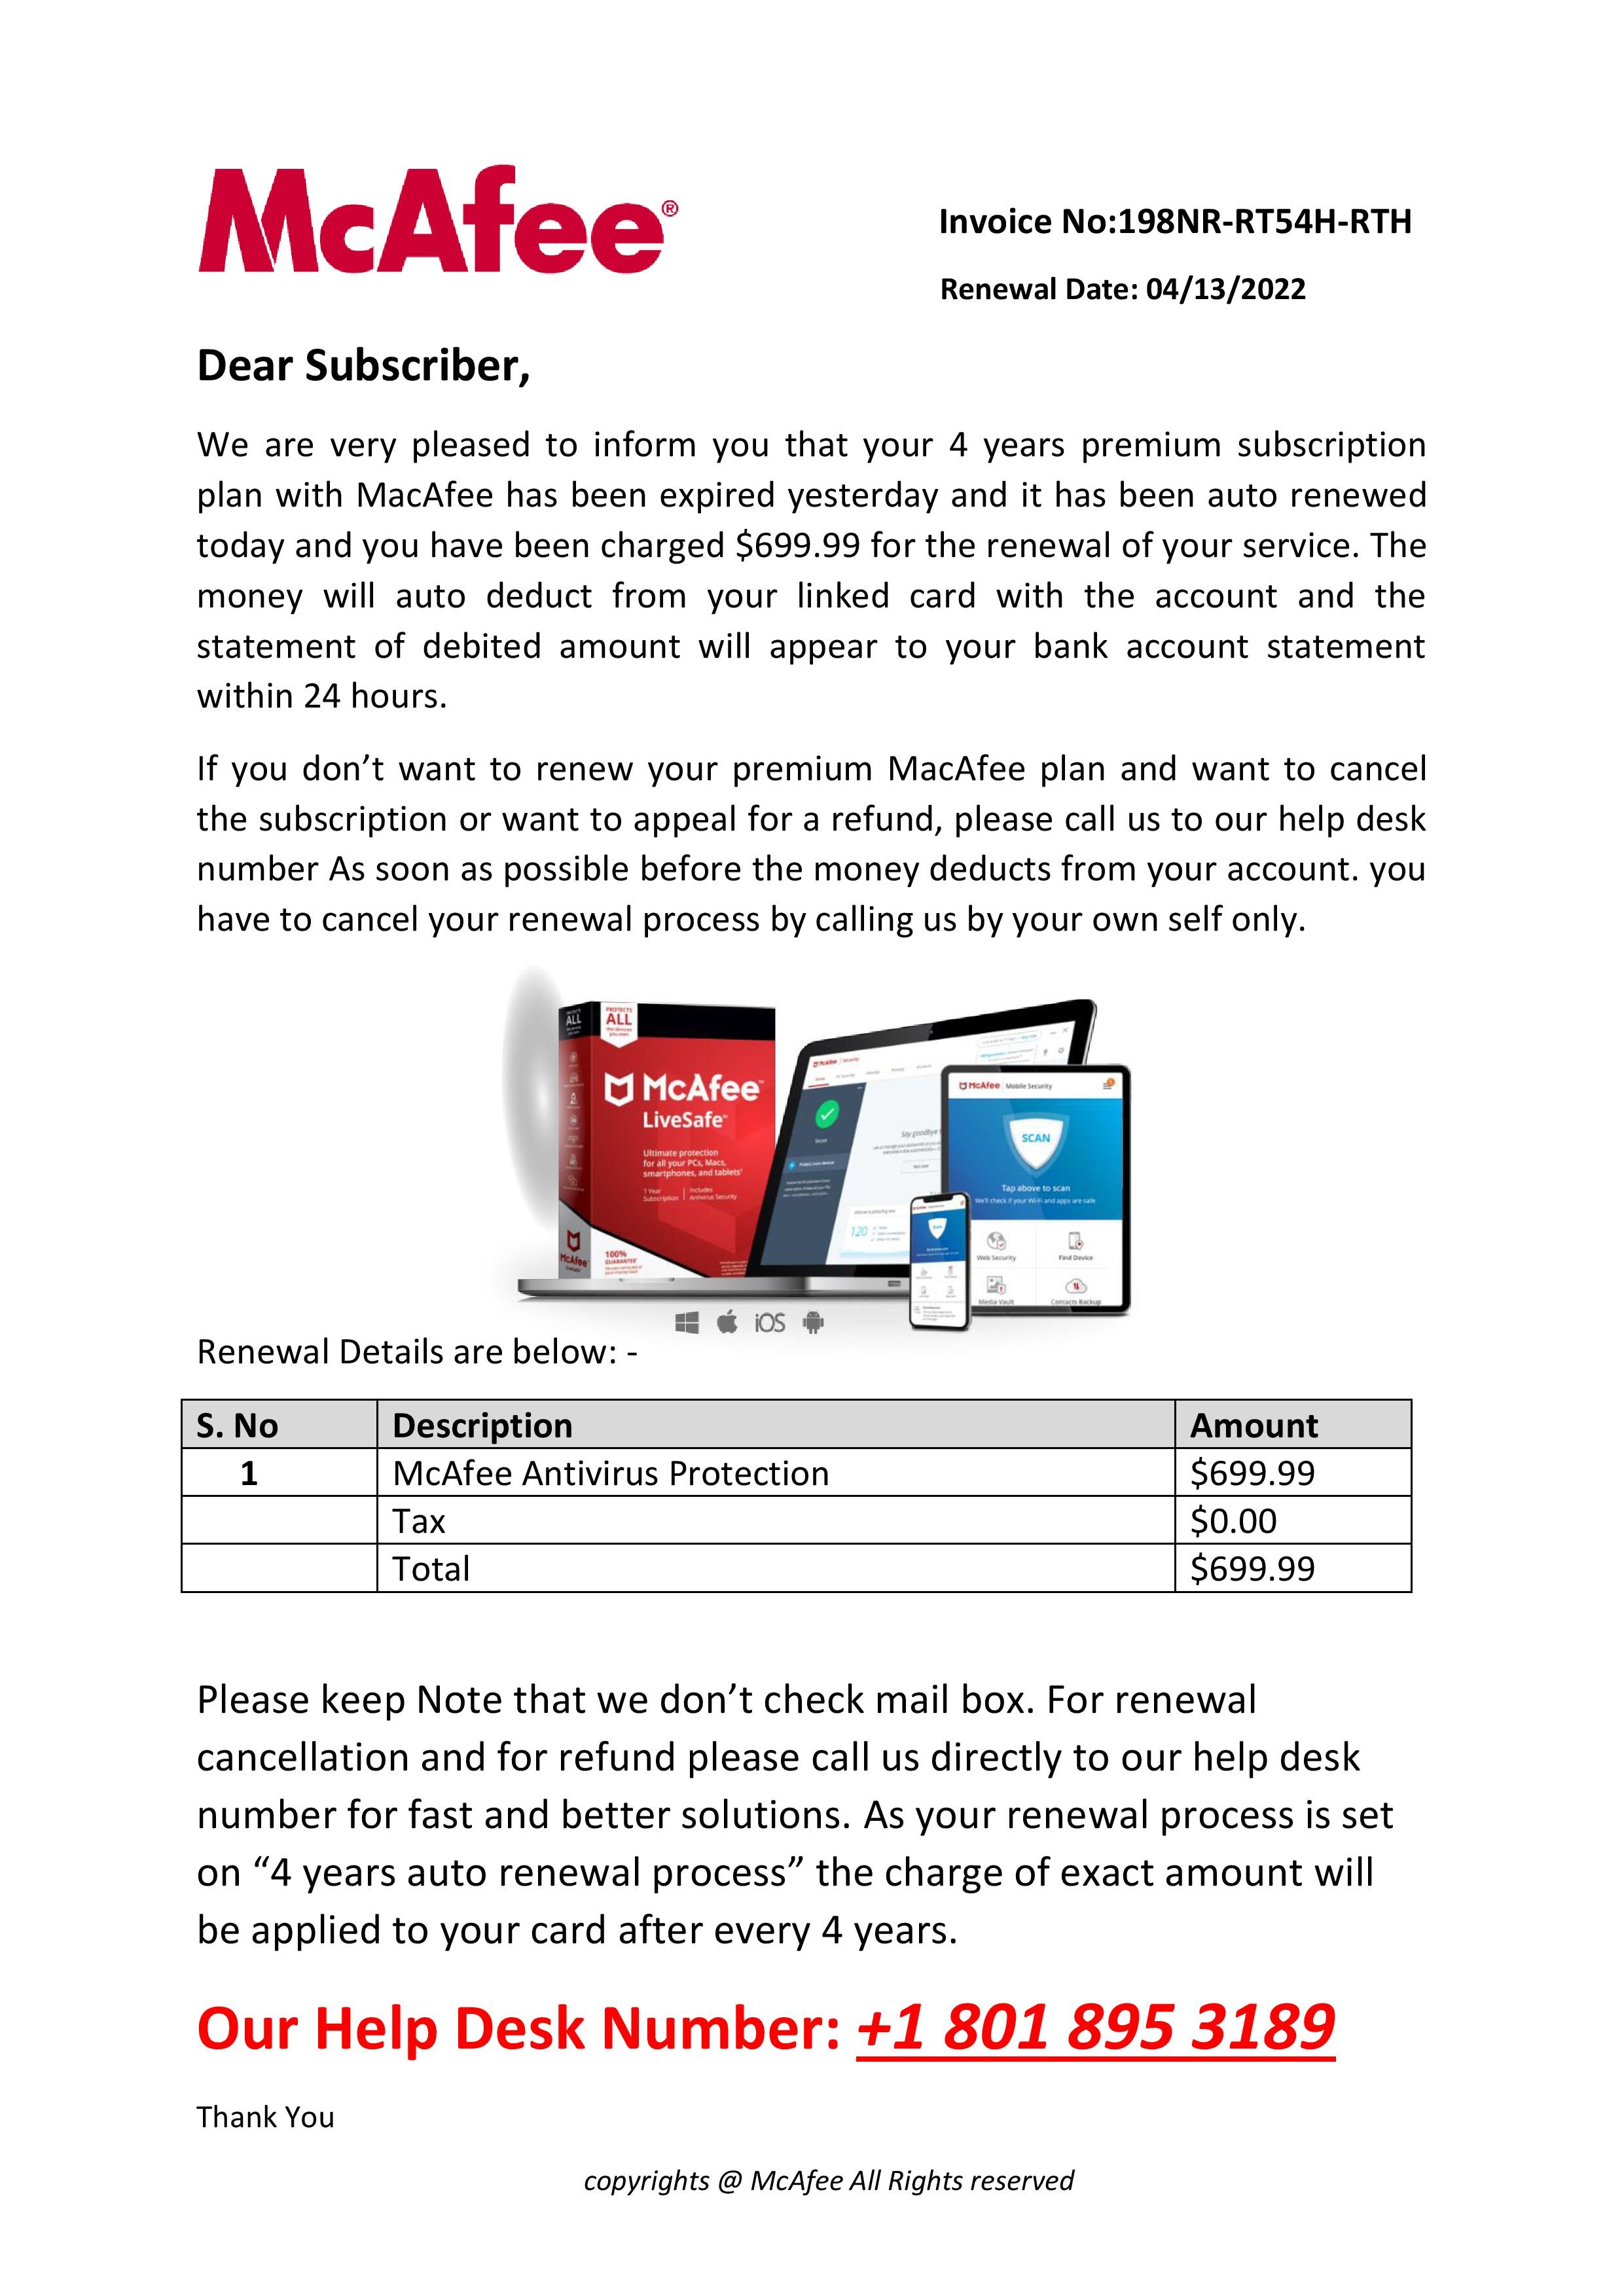 McAfee Renewal Email Scam